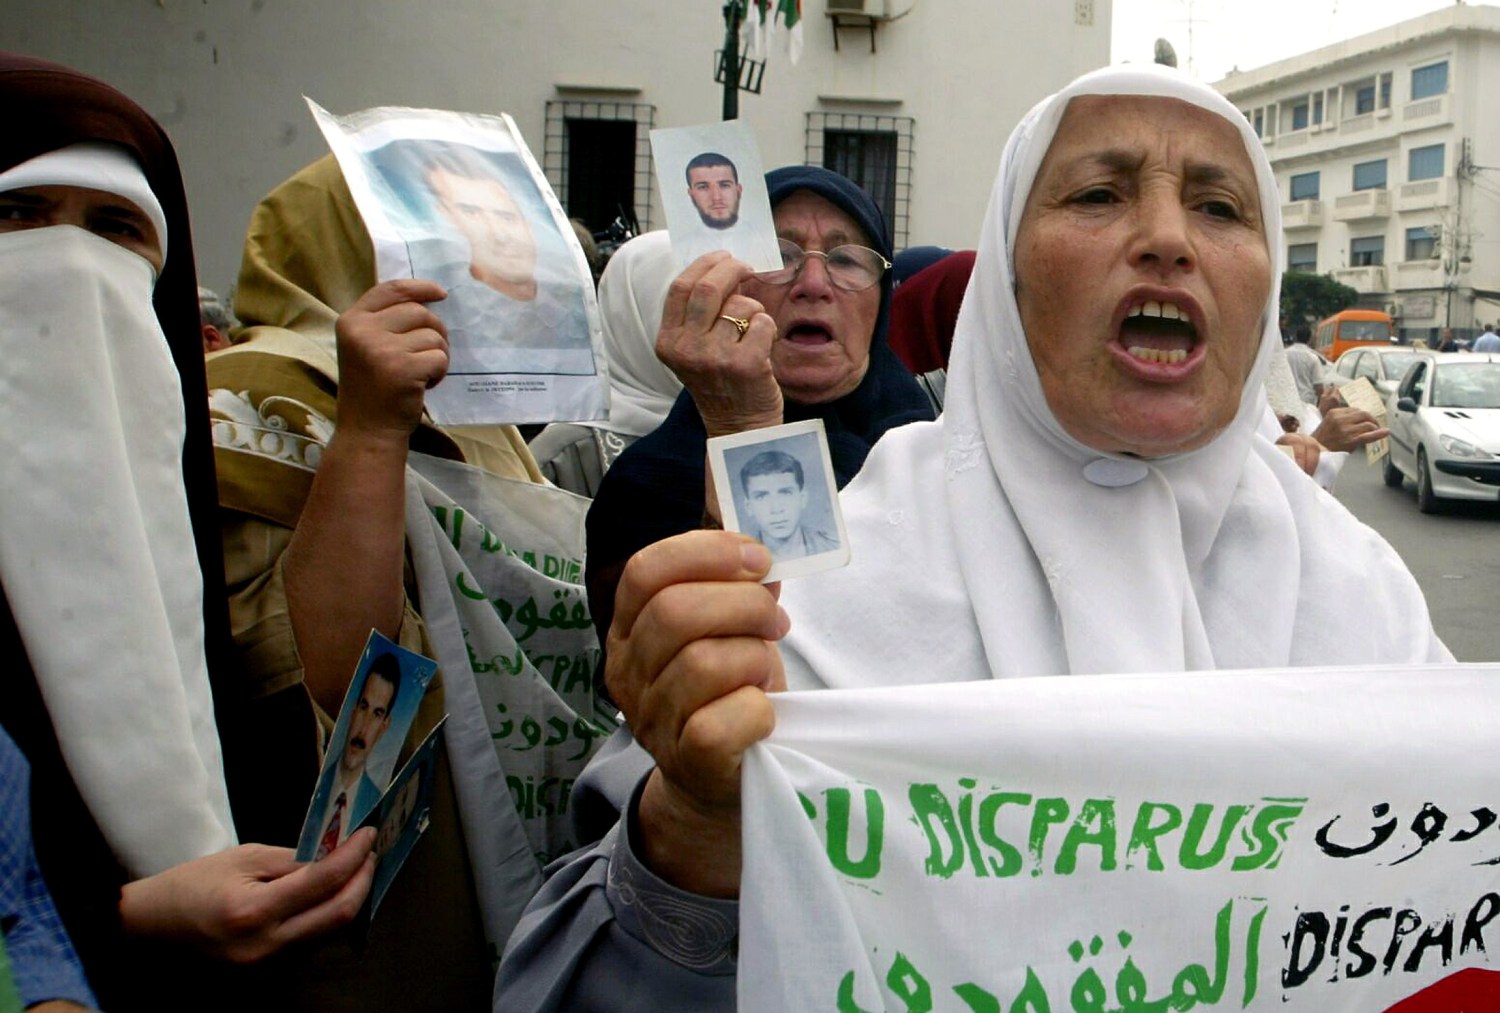 Algerian mothers hold up photographs of their disappeared loved ones during a protest outside the office of a human rights group in Algiers September 28, 2005. For a decade, dozens of mothers have held sit-ins once a week outside the office demanding the return of their loved ones or information about their fates. Algeria's national referendum, which will be held on September 29 aims at ending more than a decade of conflict which will help Islamists reach their goal of forming a purist Islamic republic ,an influential former leading militant said on Monday. REUTERS/Louafi Larbi